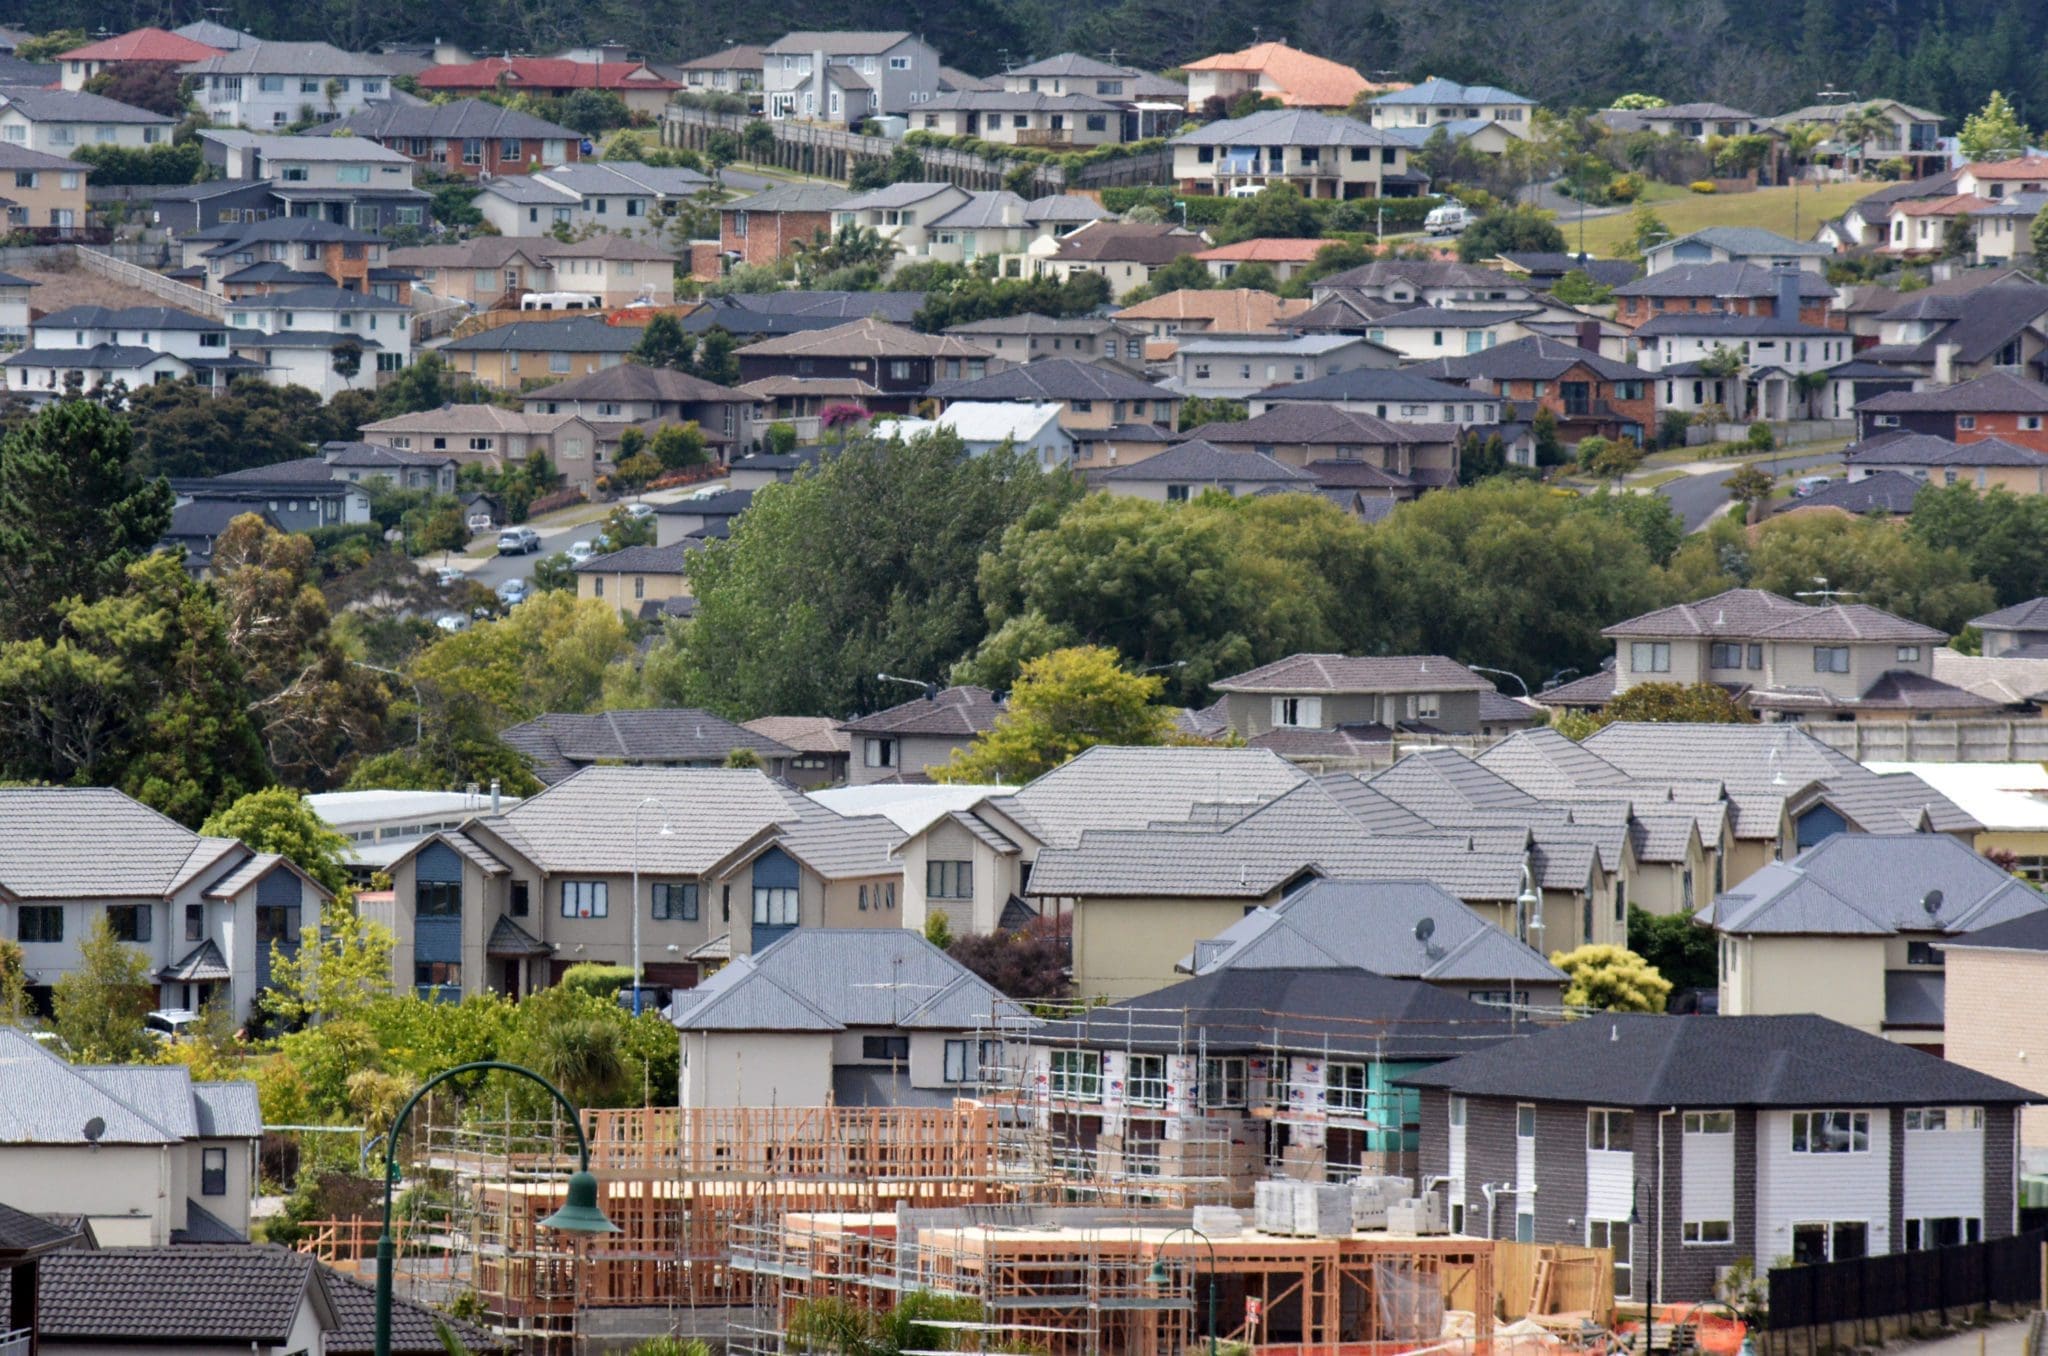 Investment property tax in New Zealand doesn't have to be difficult, with NZ Rental Tax it isn't